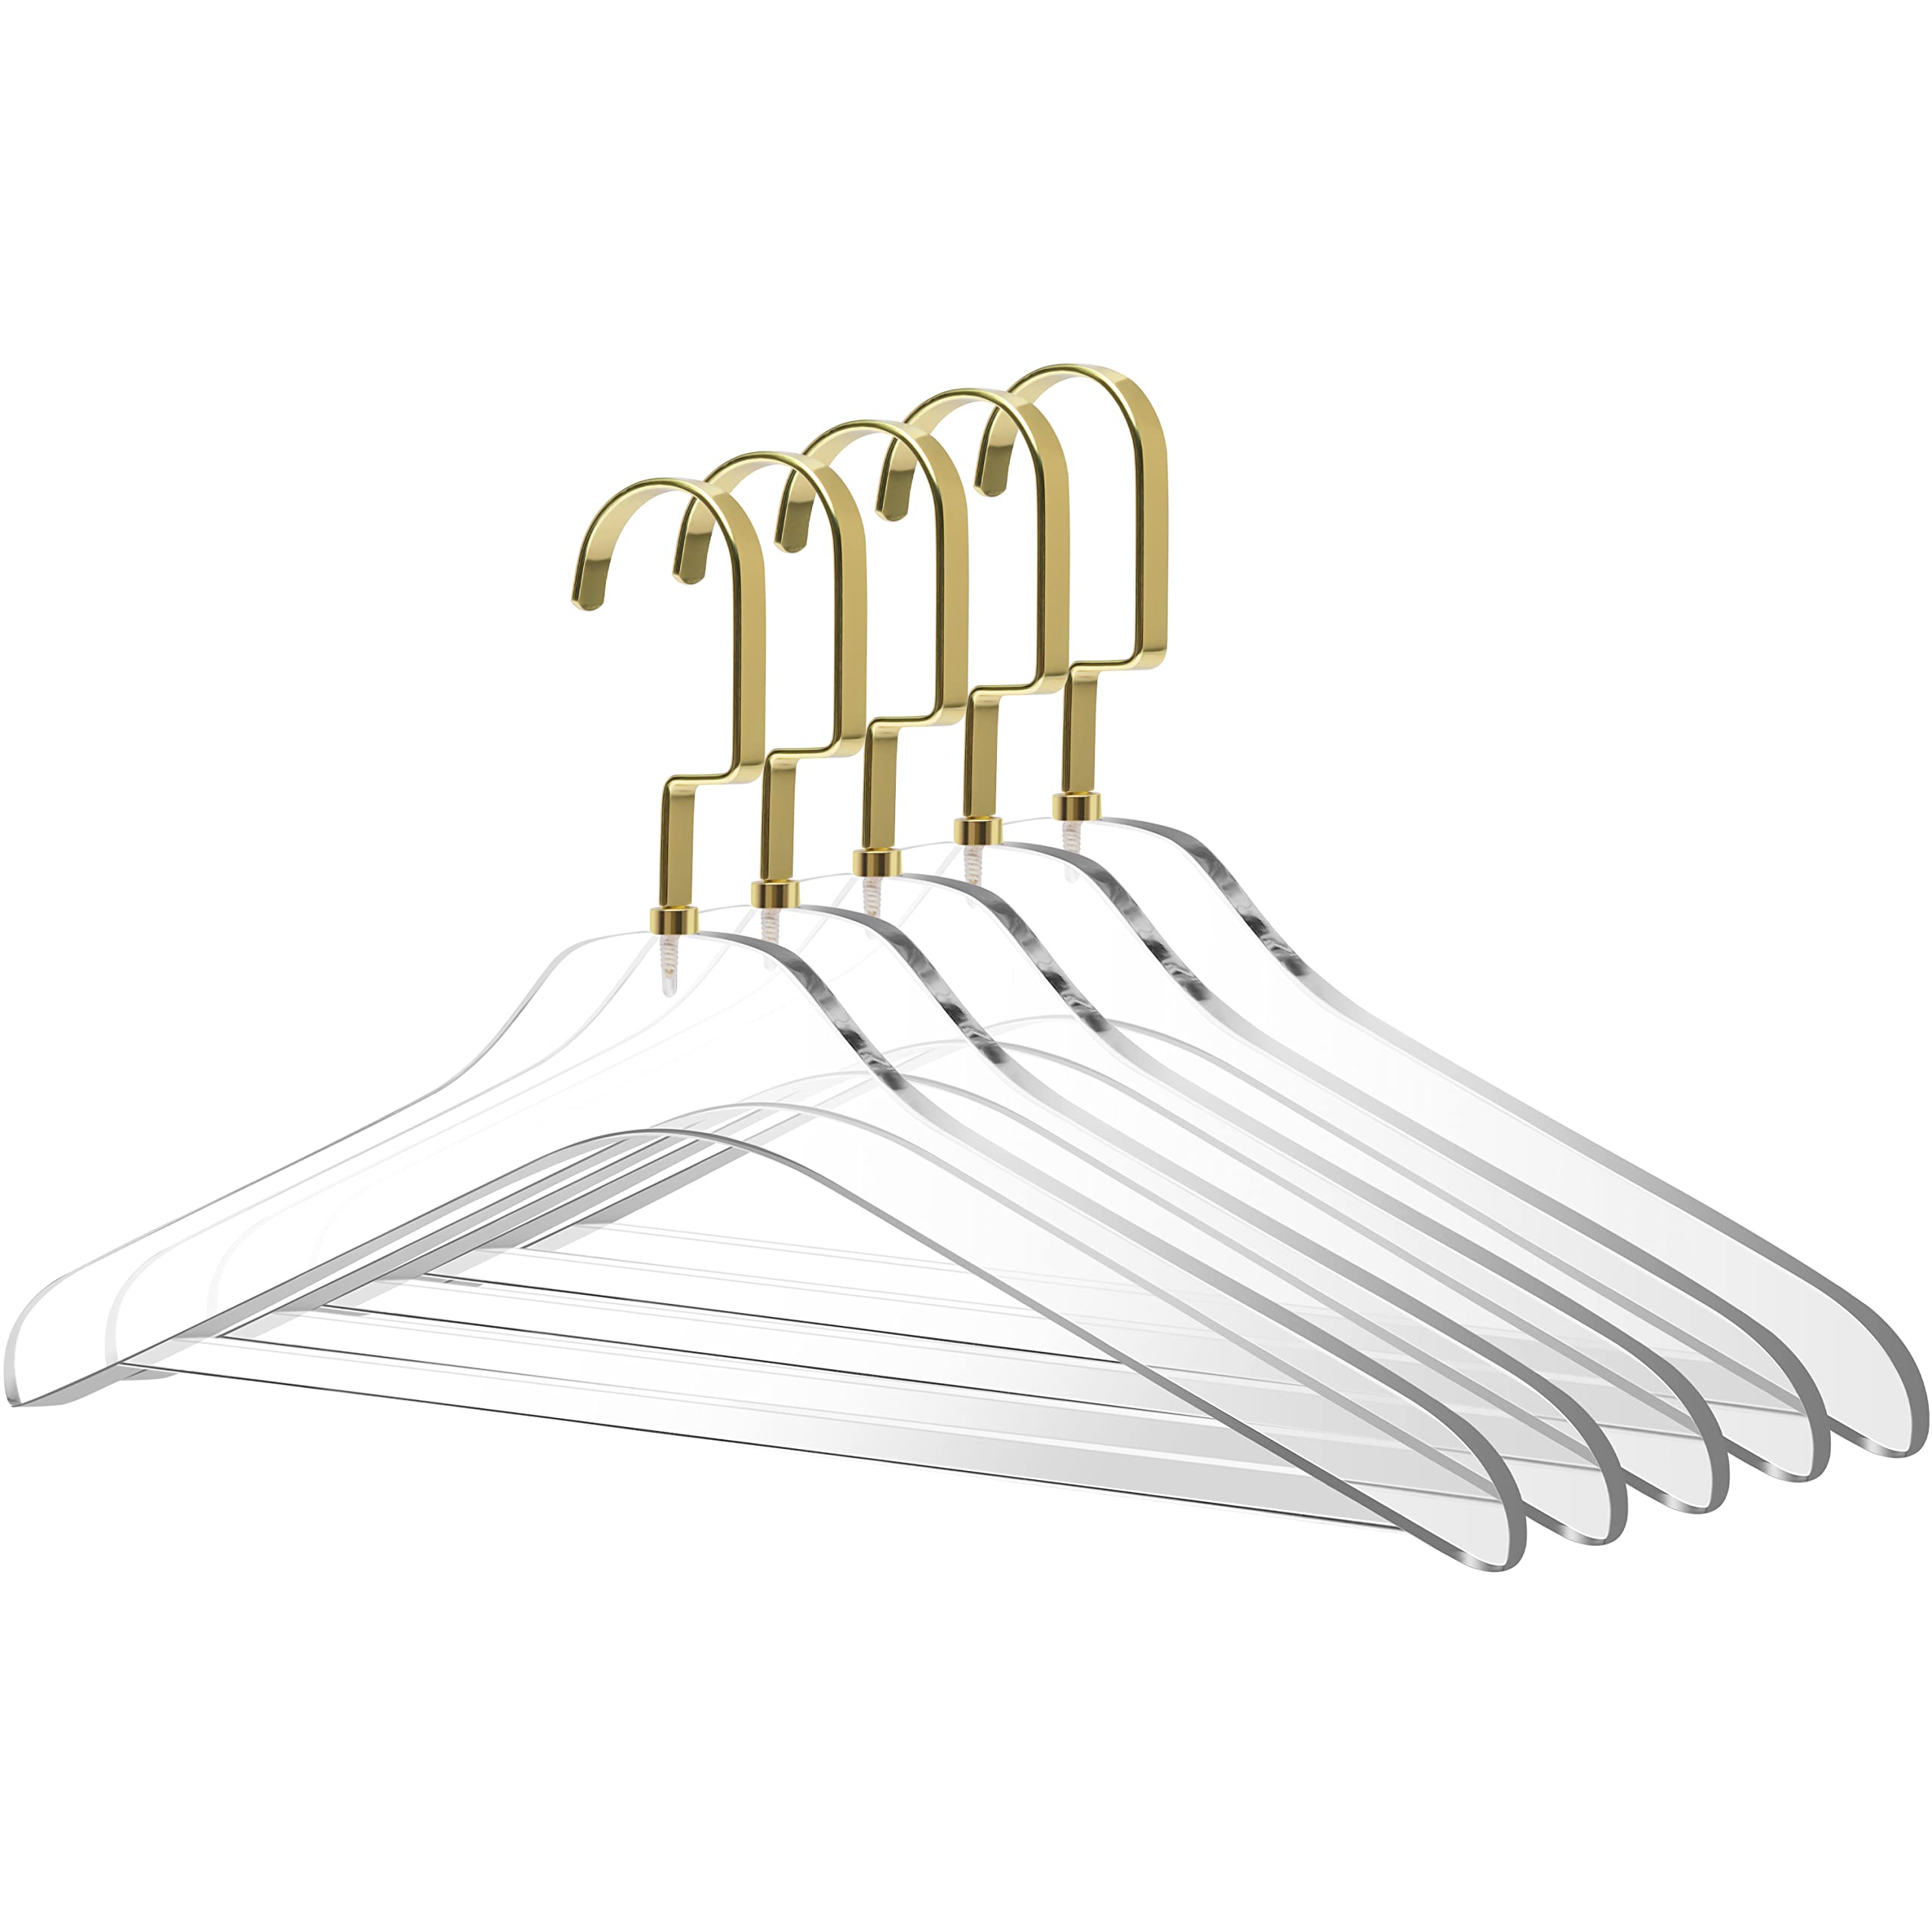 Quality Clear Acrylic Lucite Coat Suit Hangers with Bar – 5-Pack, Stylish Clothes Hanger with Acrylic Pant Bar - Coat Hanger for Dress, Suit - Closet Organizer Adult Hangers  - Like New